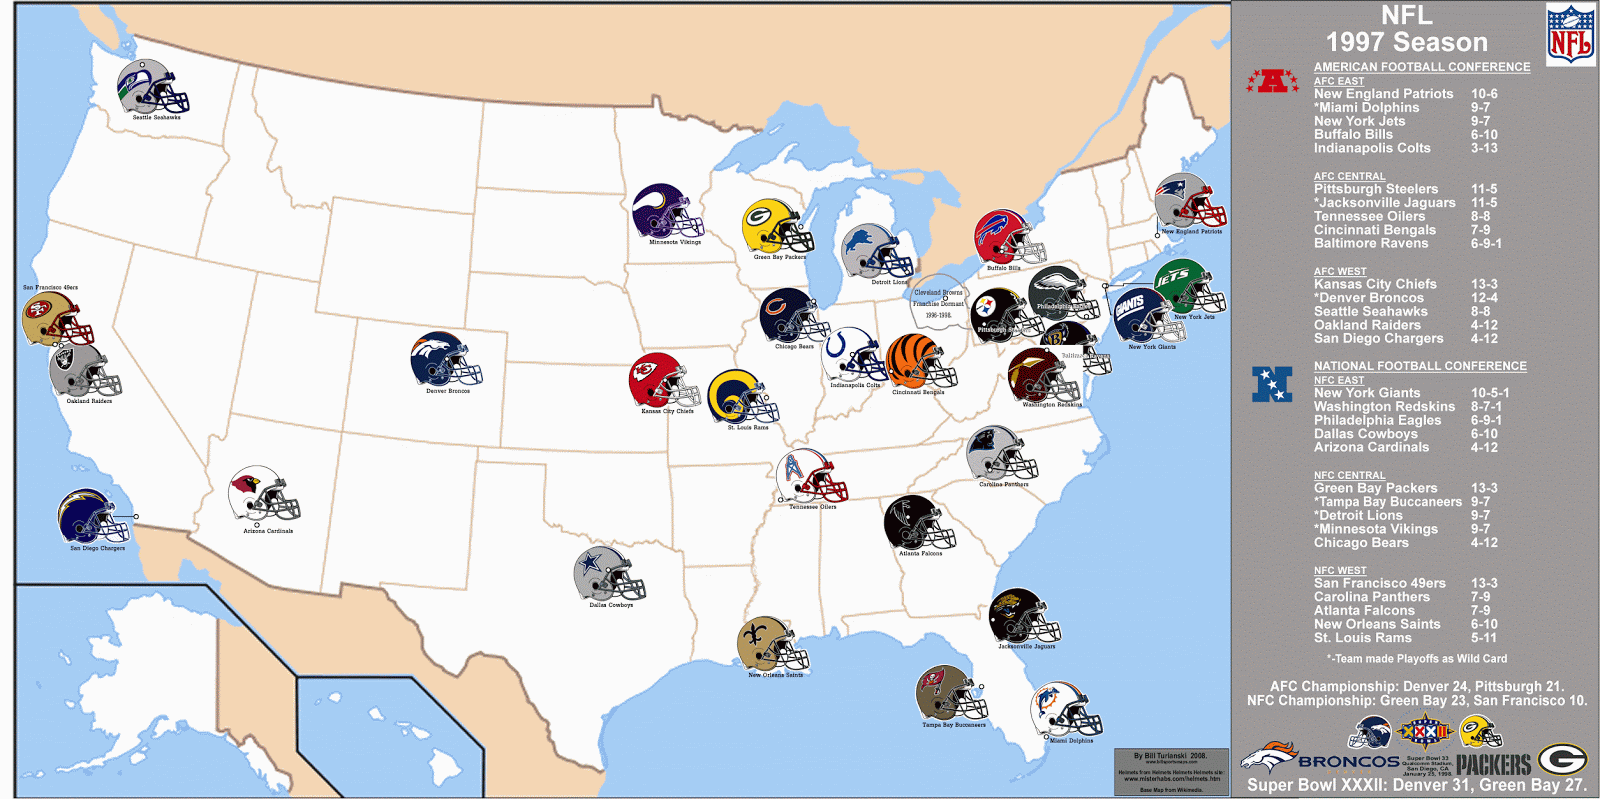 Next Major League Expansion Team My MADdenized Map of New NFL Turf